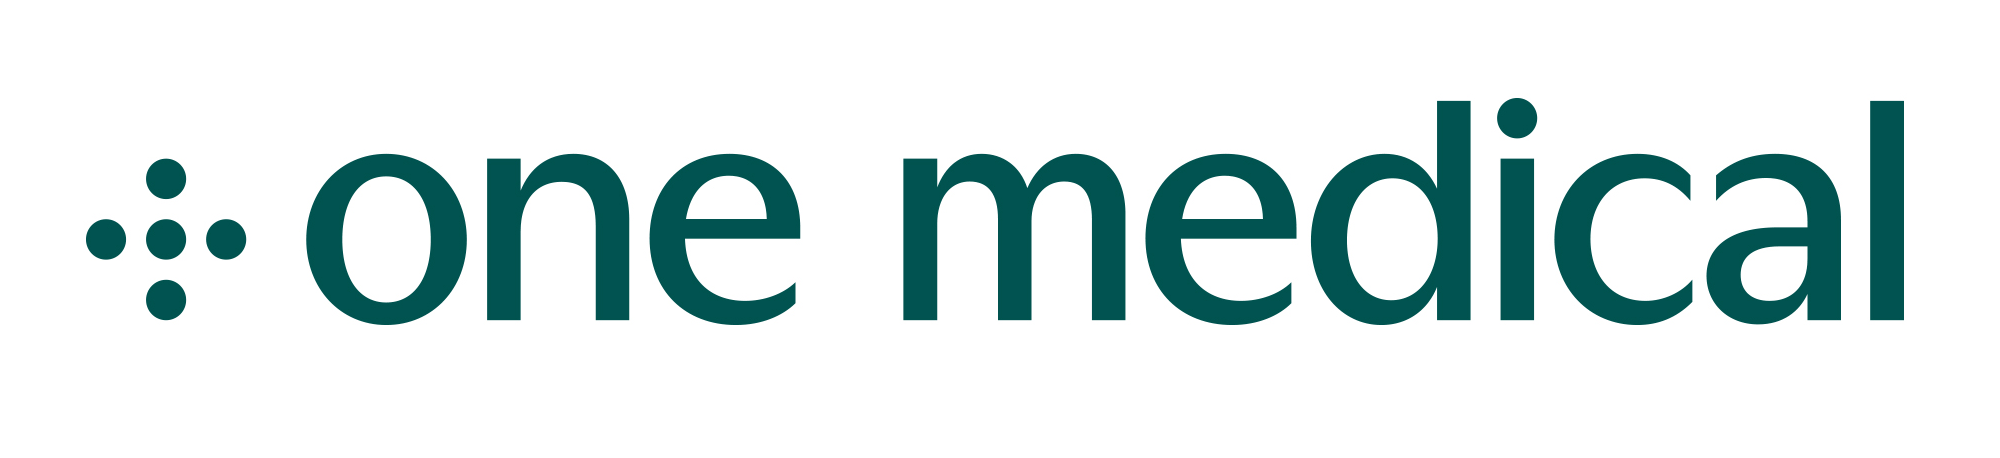 Supreme Medical Logo - Brand New: New Logo and Identity for One Medical by Moniker and In-house